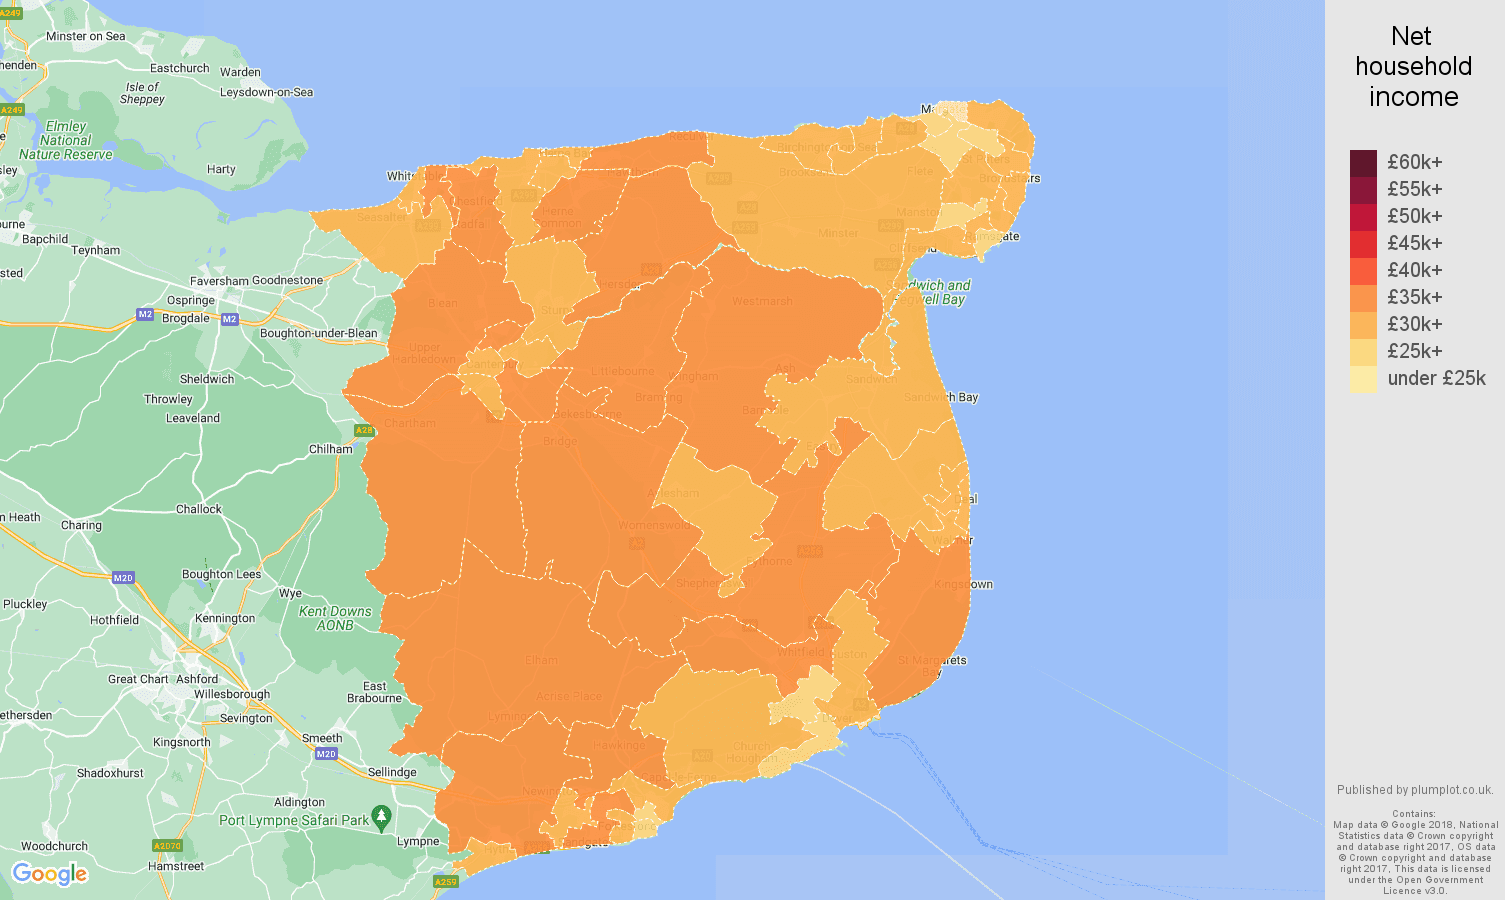 Canterbury net household income map